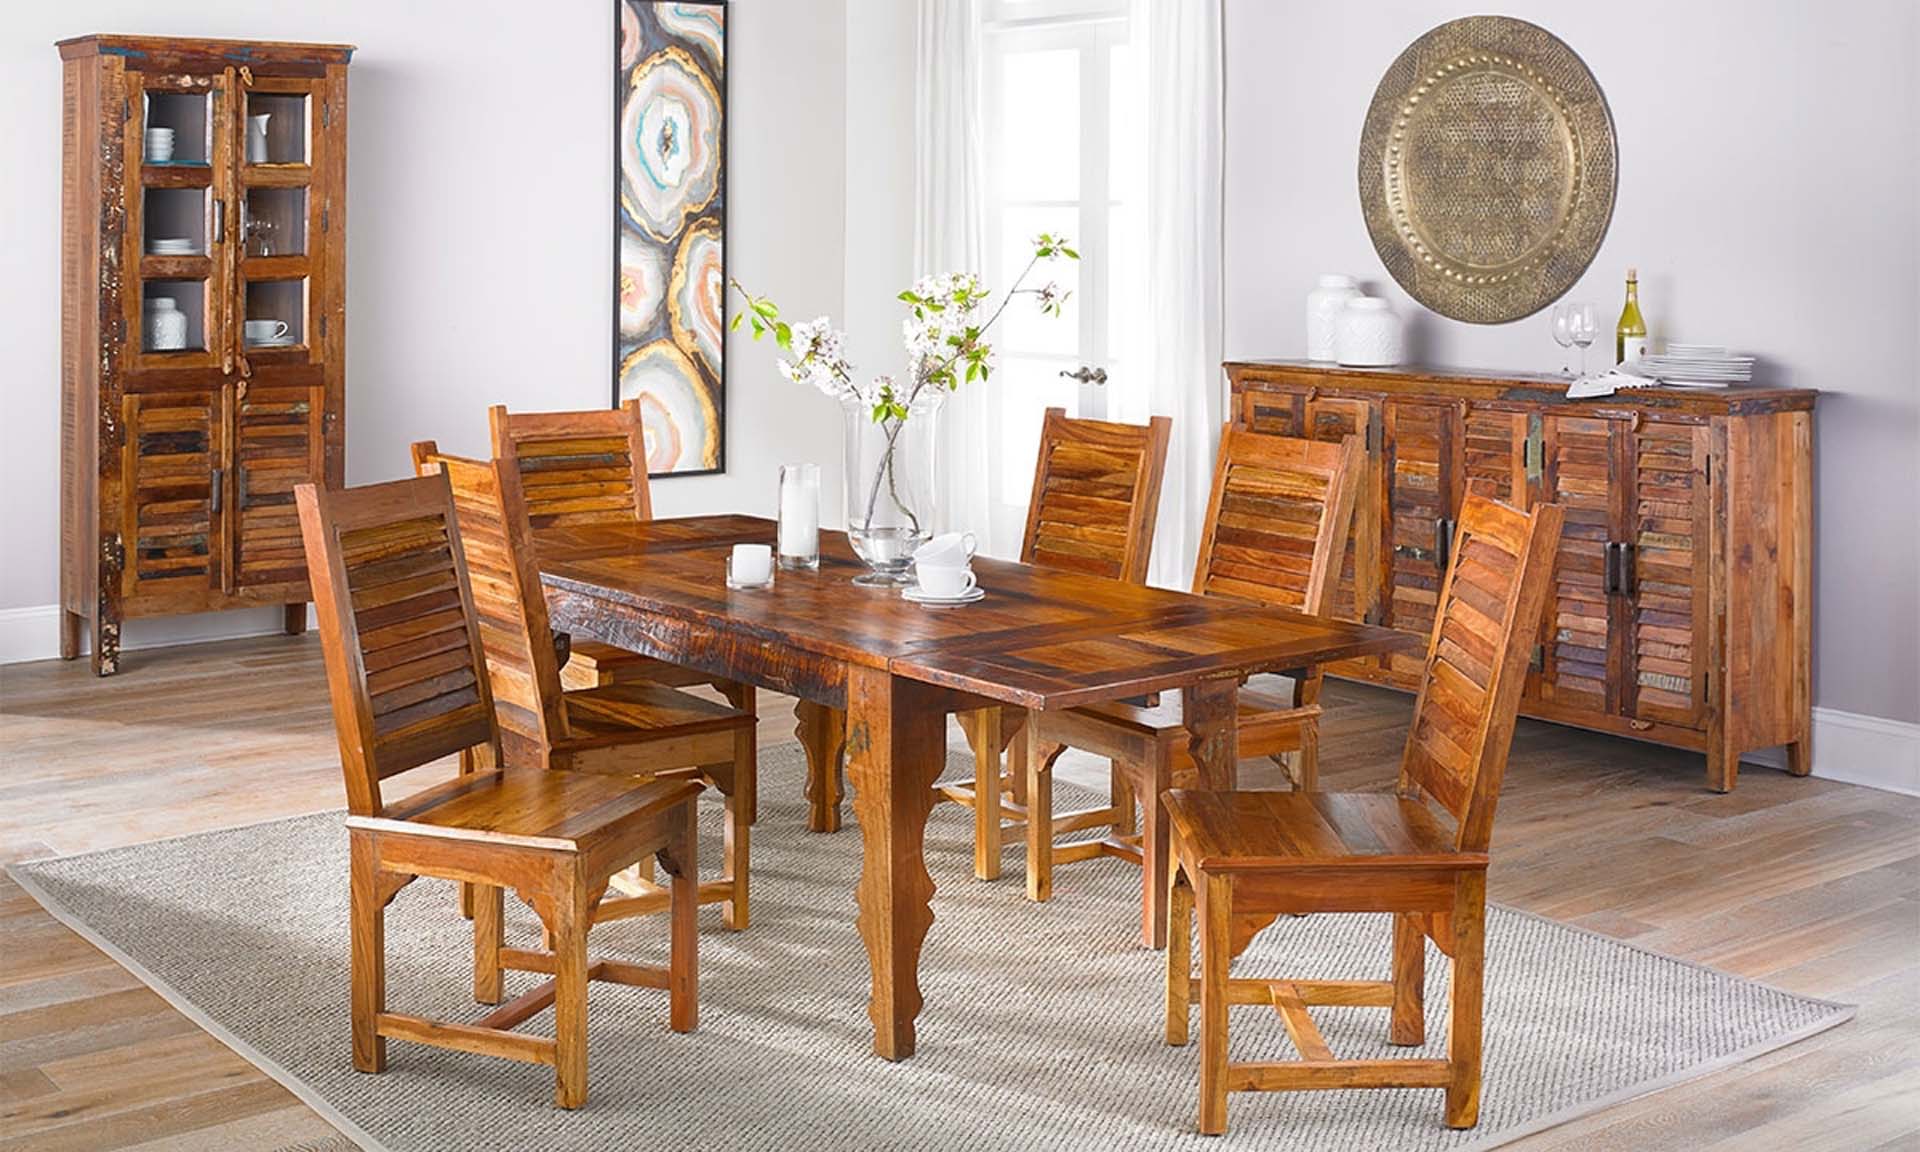 Top 4 Reasons To Use Oak Furniture For Your Home